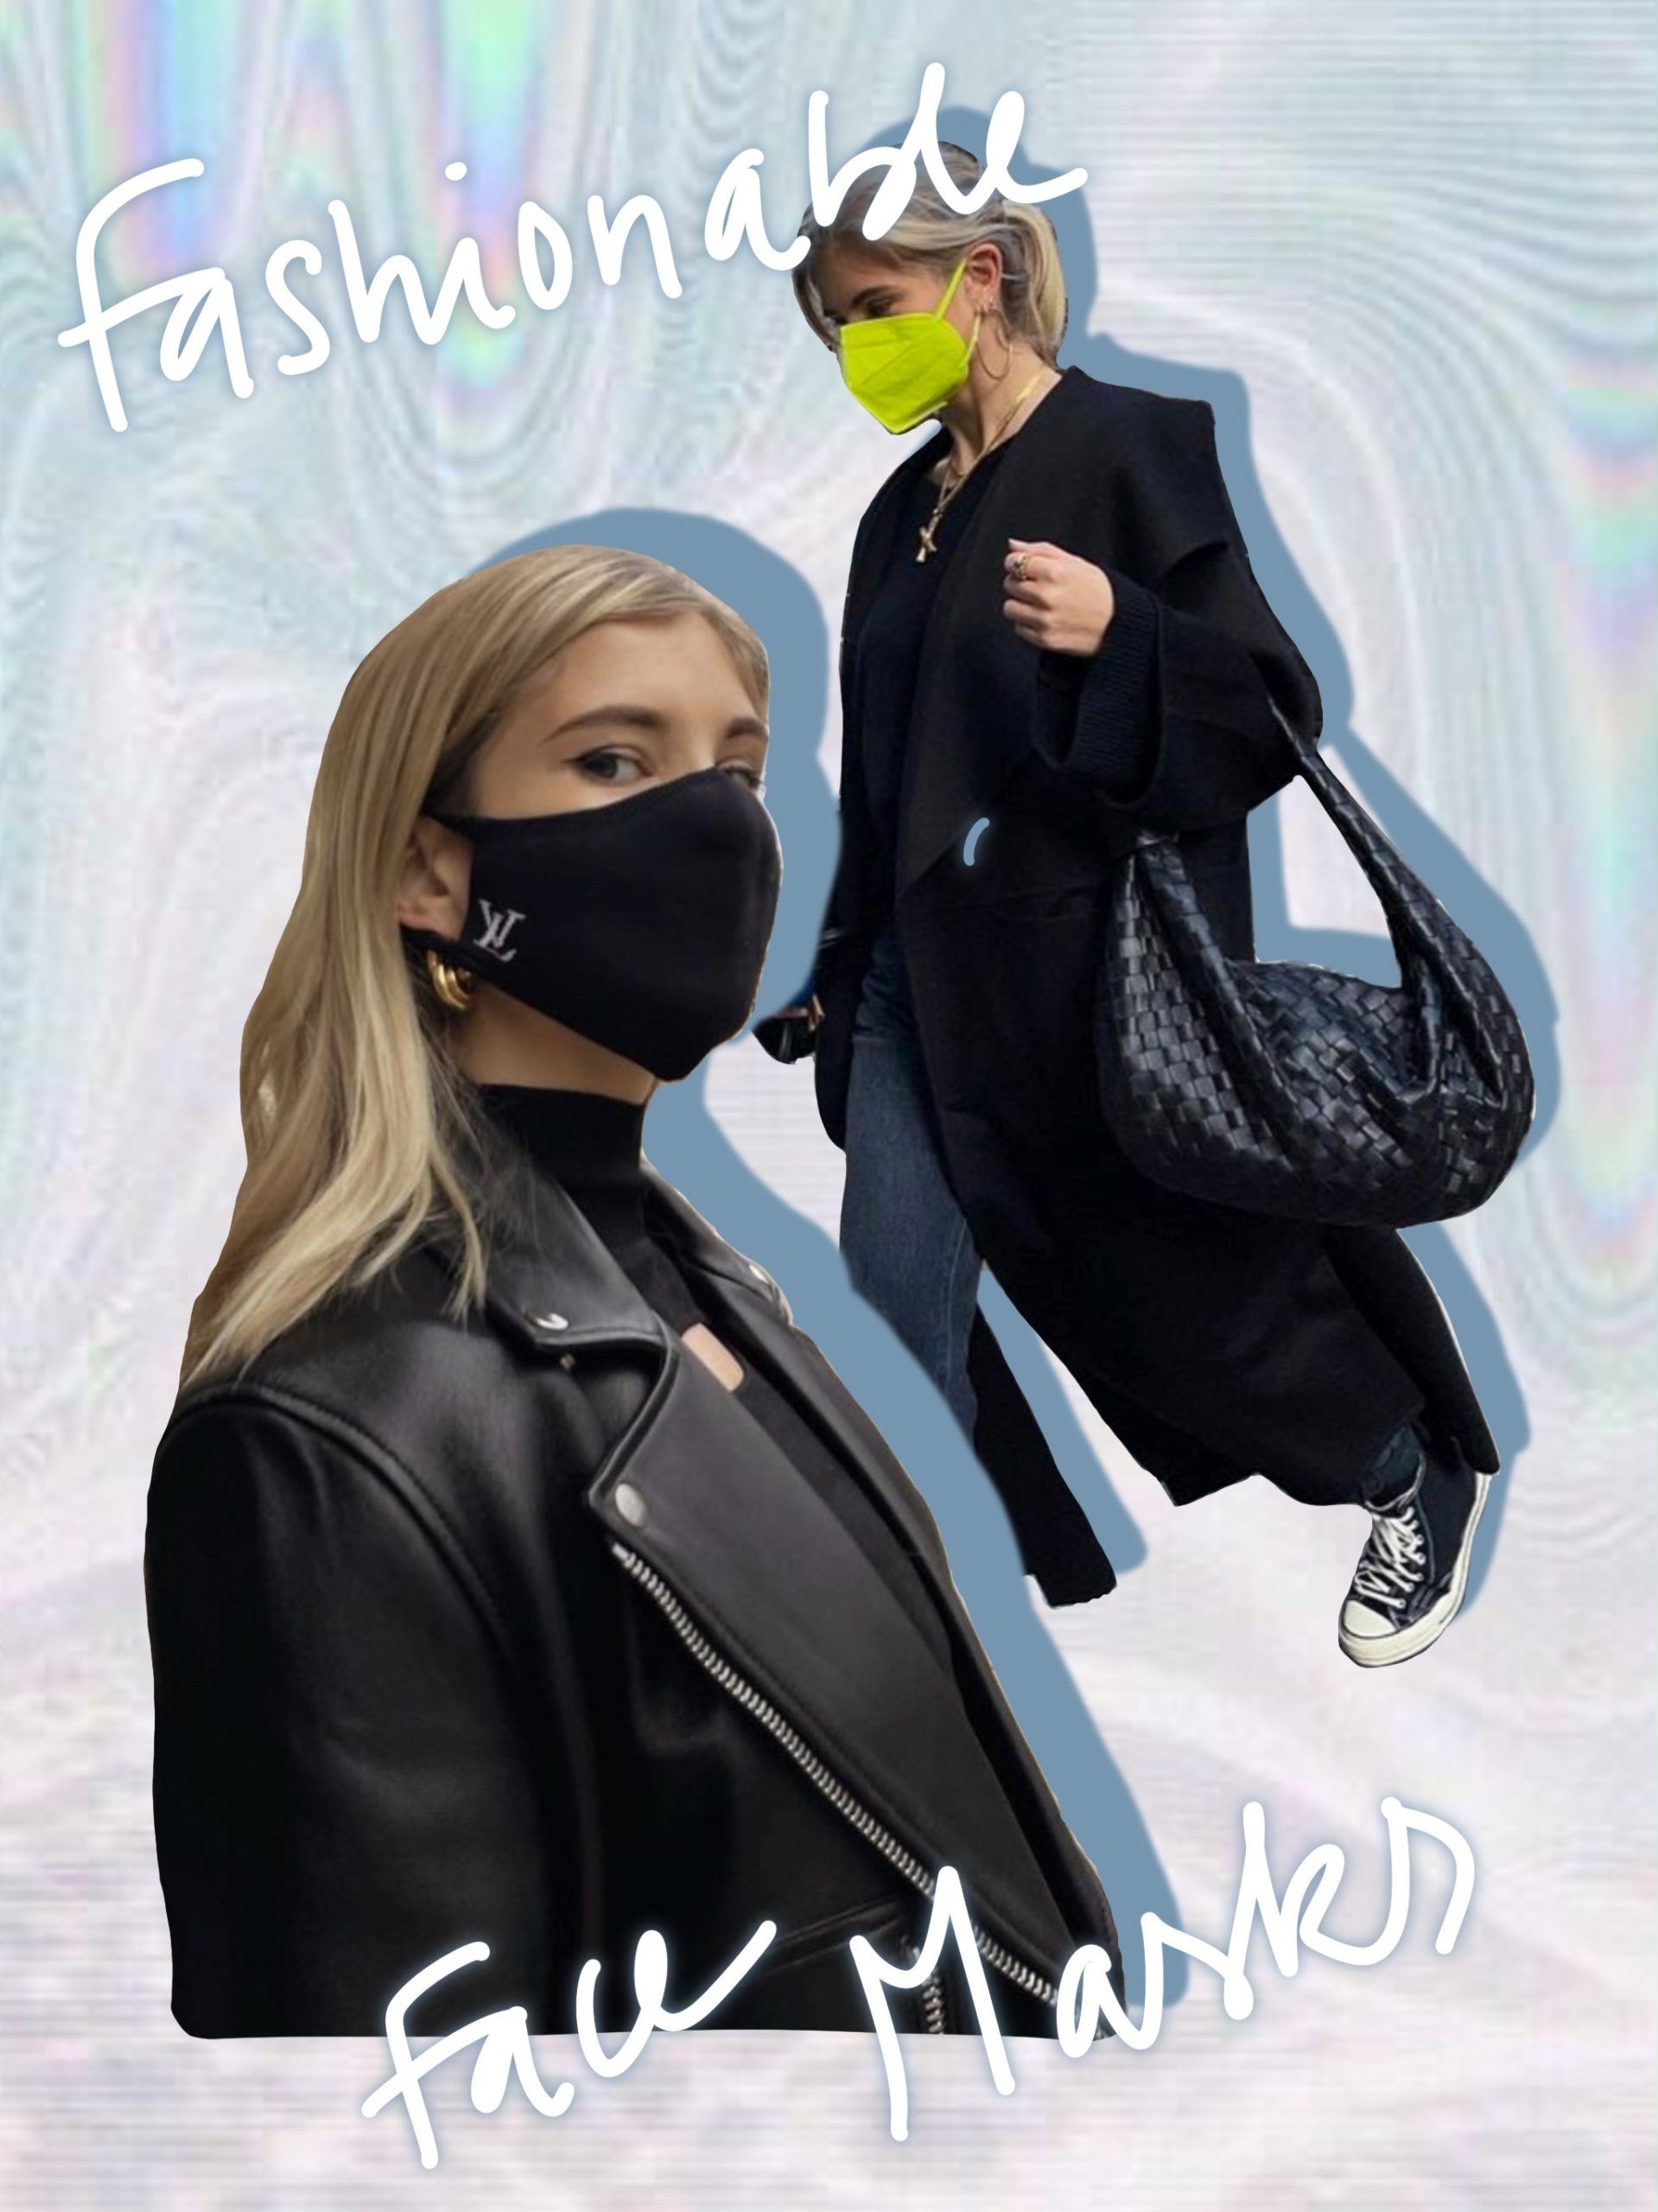 Xenia Adonts wearing a Louis Vuitton face mask and a yellow neon fashionable face mask